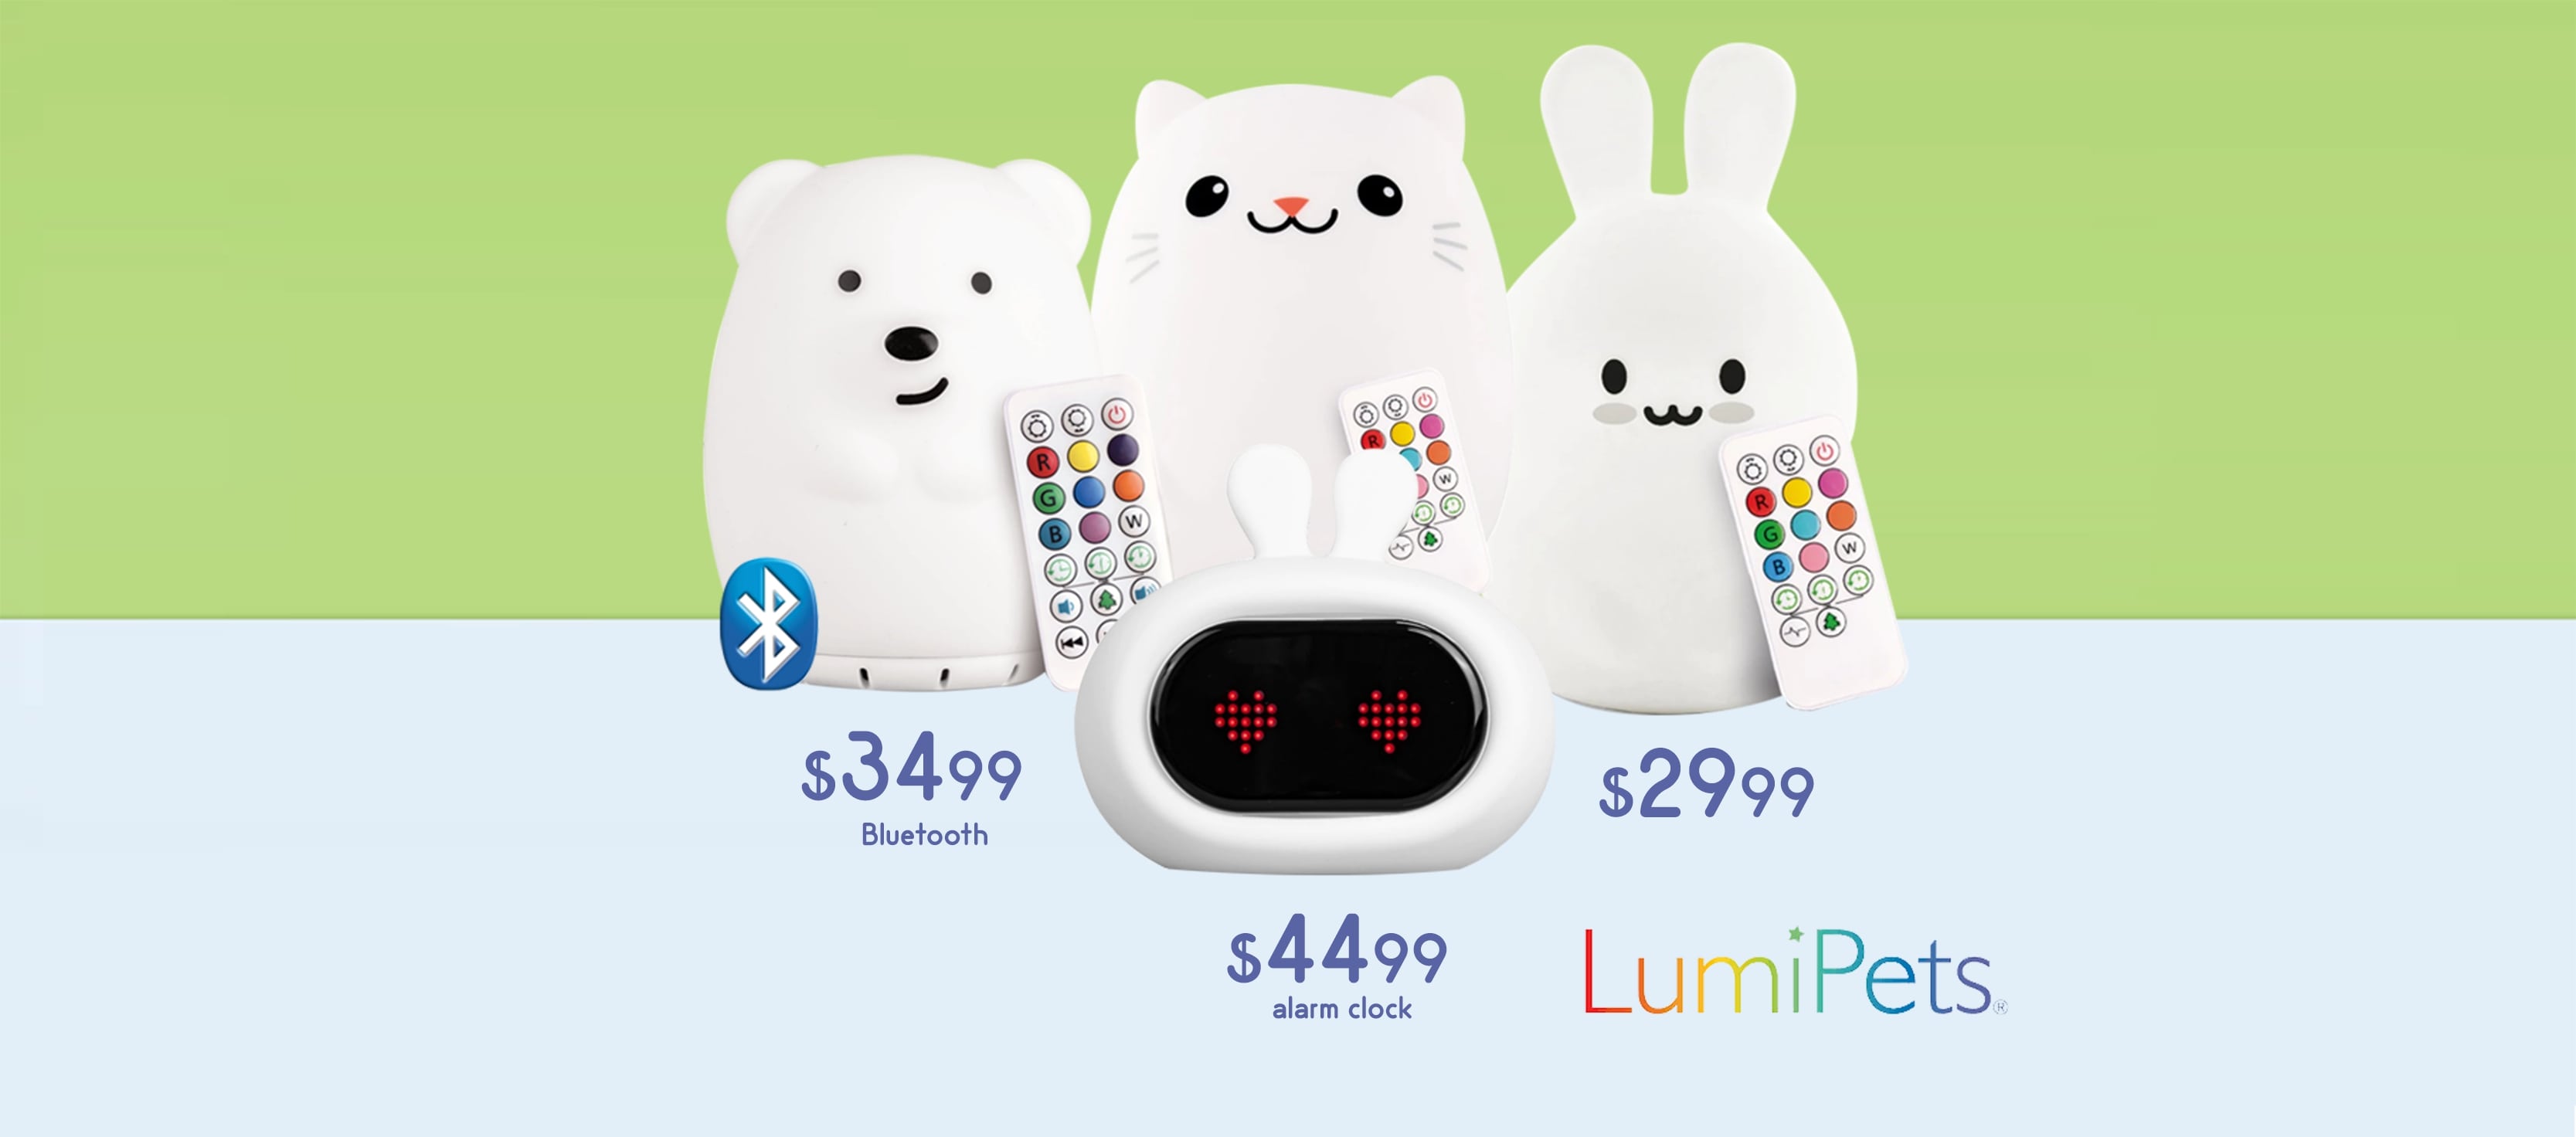 Keep the monsters away with these amazing, soft and programmable LumiPets line. Shop now!